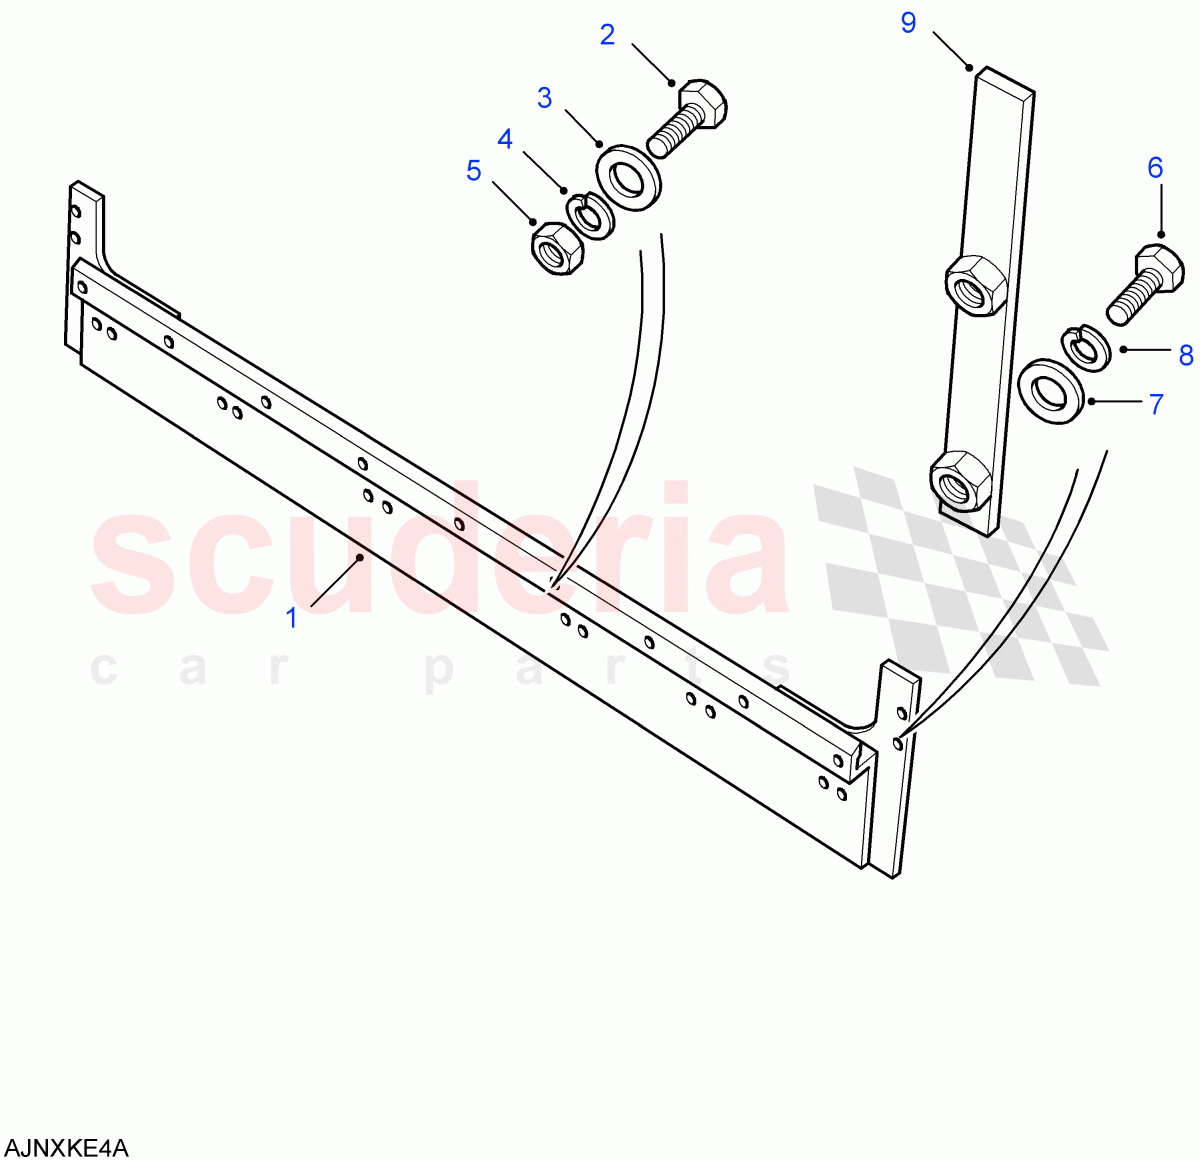 Rear Body Lower - Toe Panel(110" And 130" Wheelbase)((V)FROM7A000001) of Land Rover Land Rover Defender (2007-2016)